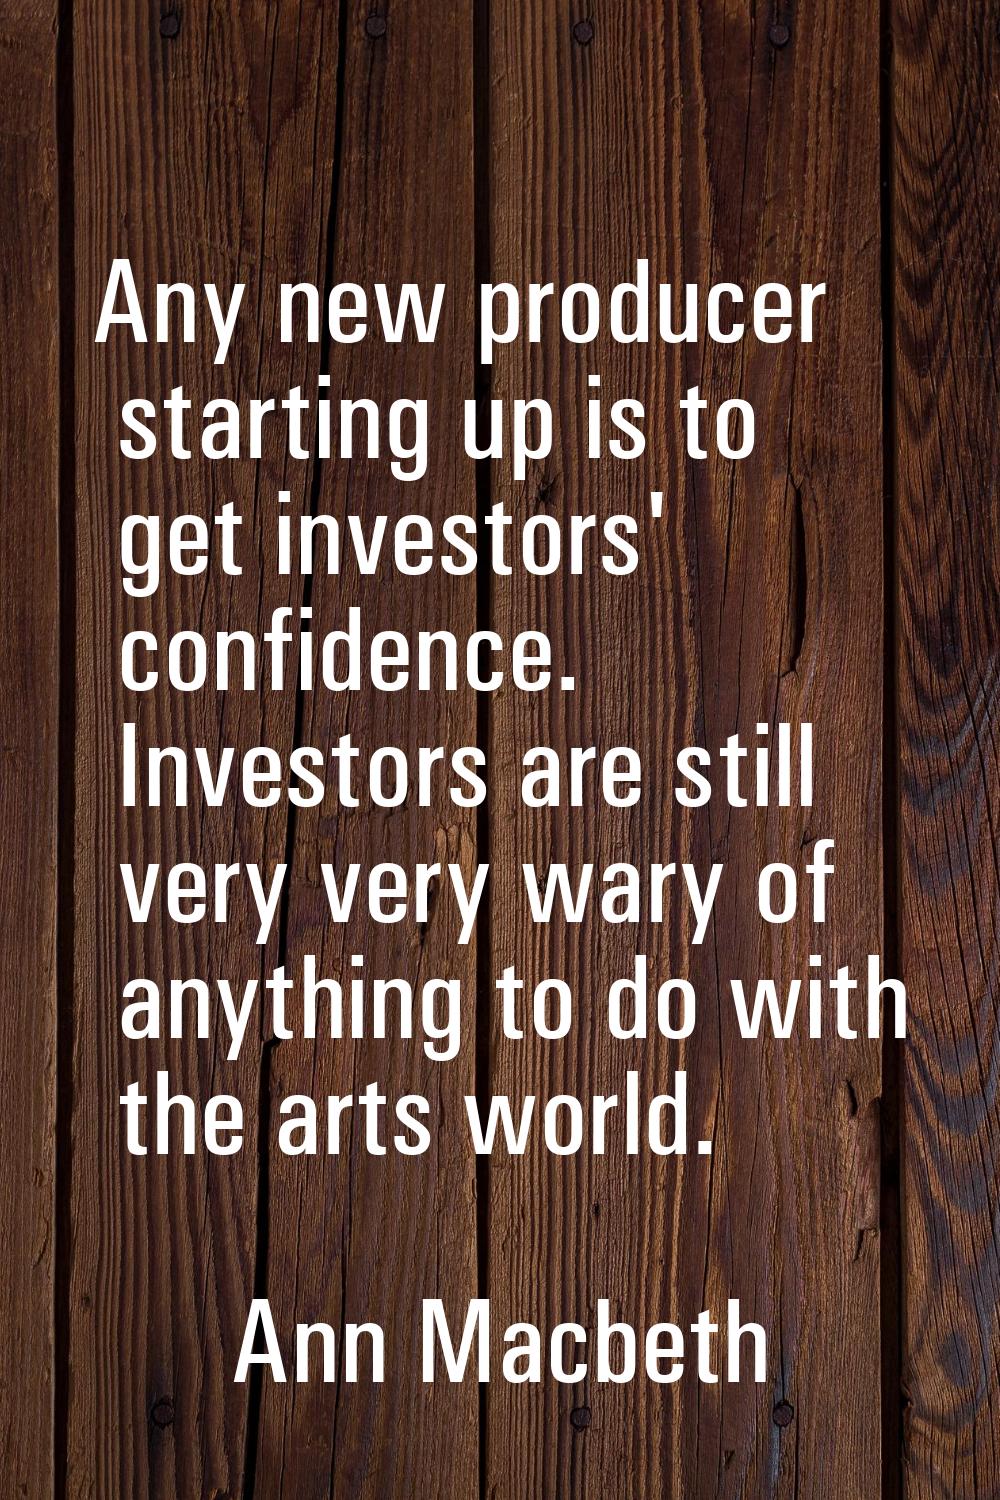 Any new producer starting up is to get investors' confidence. Investors are still very very wary of